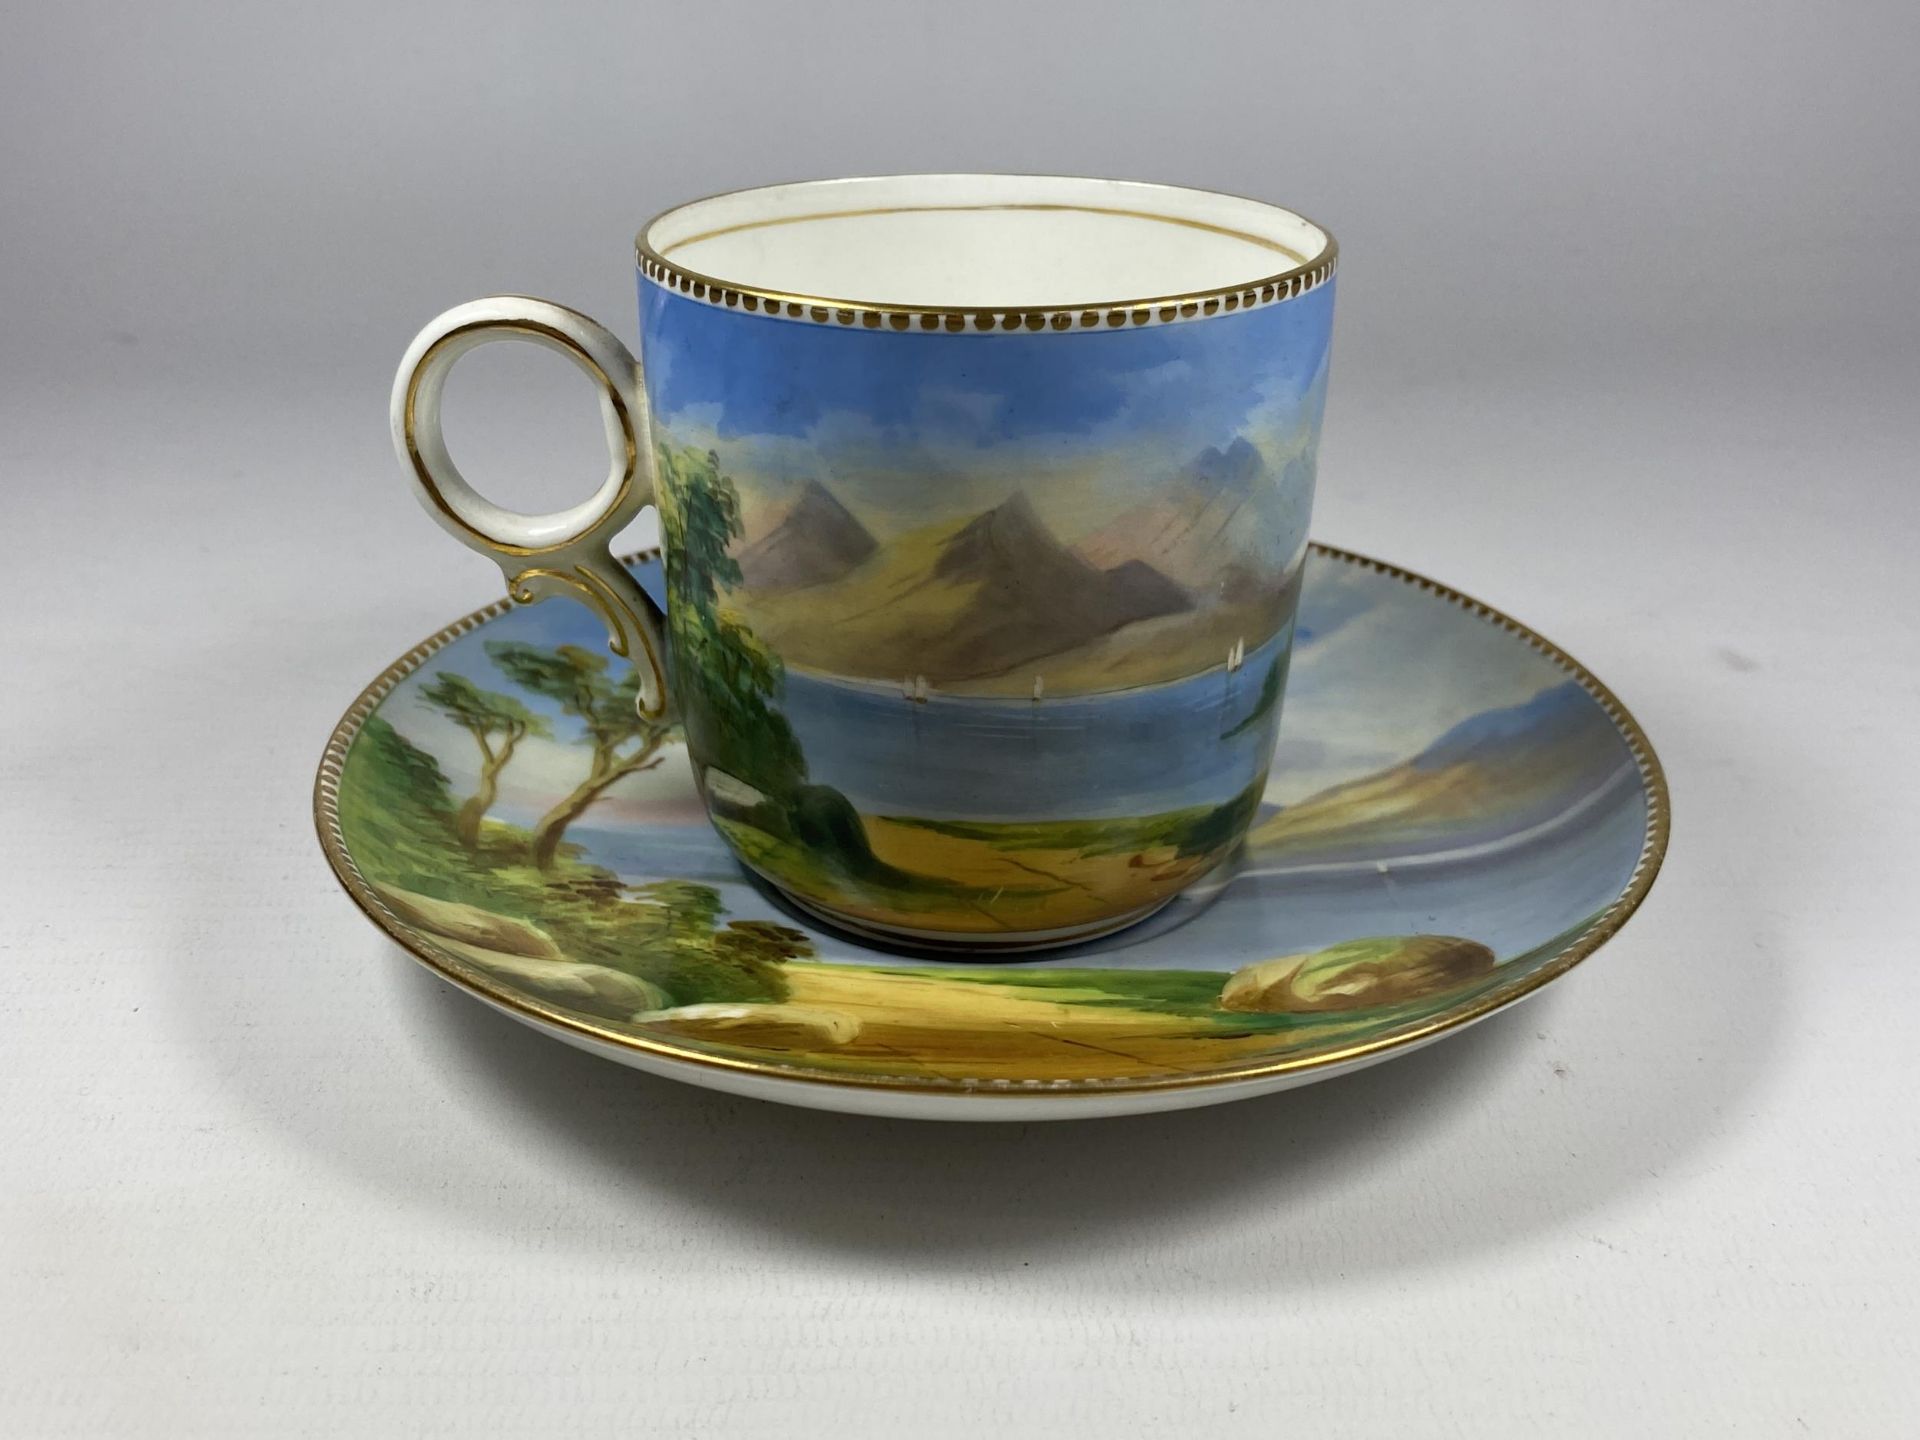 A 19TH CENTURY HAND PAINTED PORCELAIN CUP AND SAUCER WITH LAKE & CASTLE SCENE, CROSS/WING MARK TO